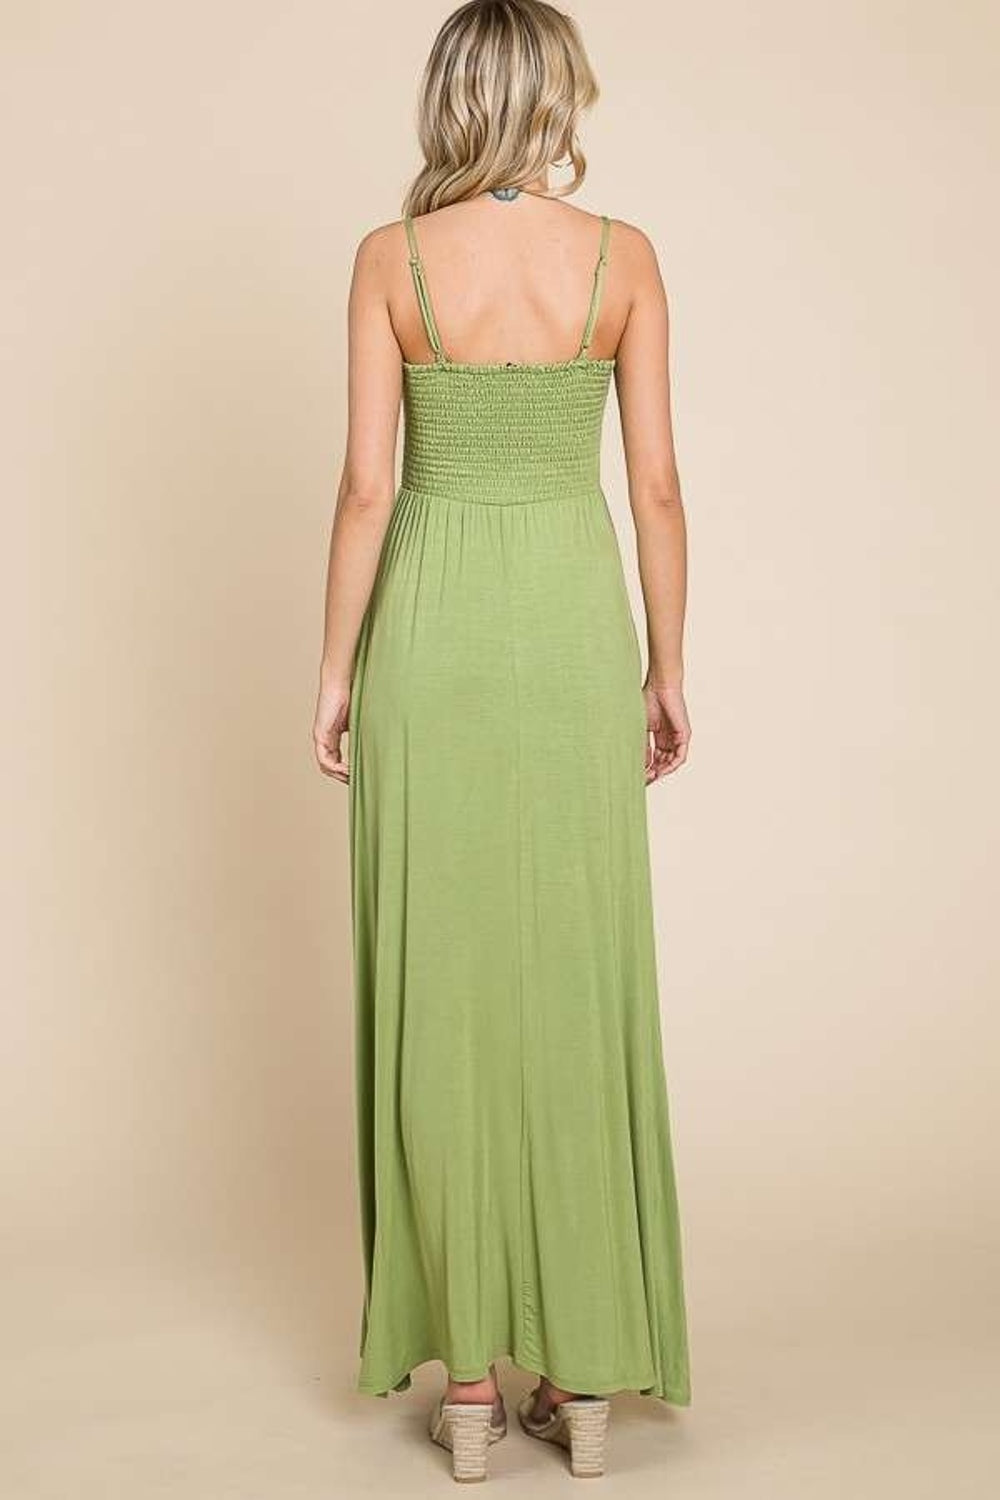 KESLEY Casual Olive Green Smocked Cami Maxi Dress with Pockets Long Summer Dresses